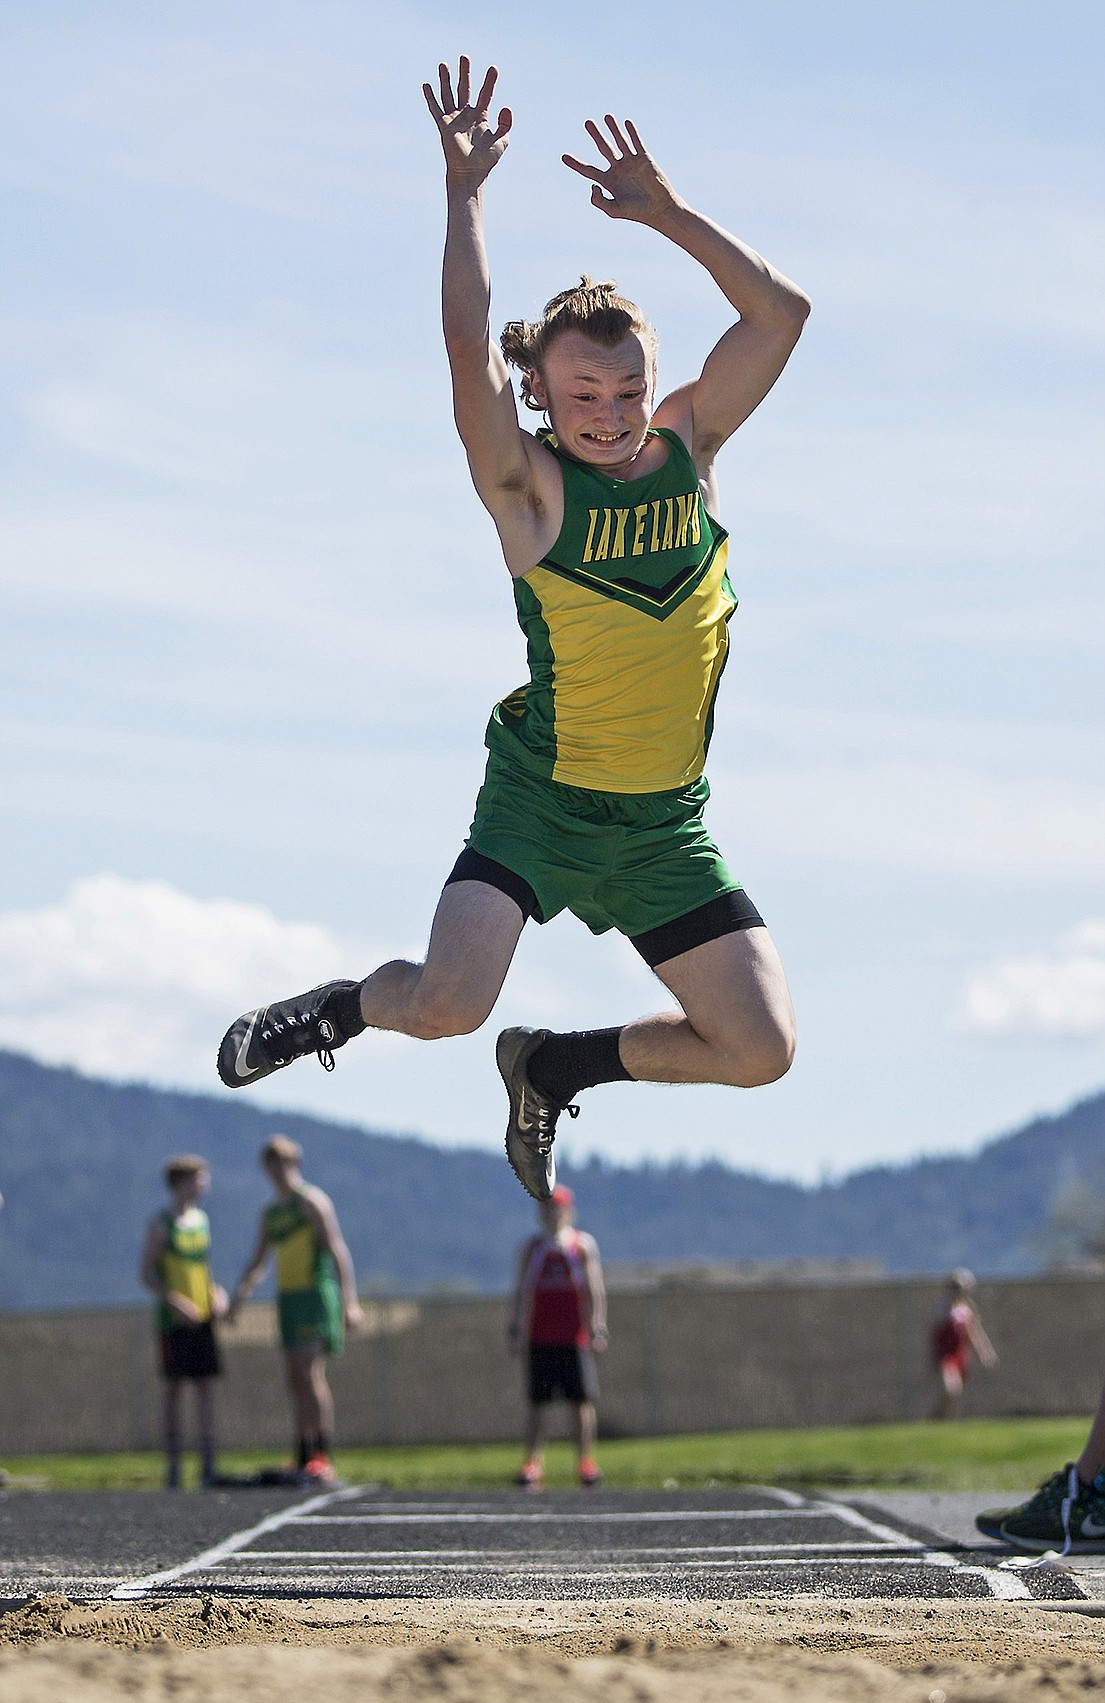 LISA JAMES/Press
Colton Boettcher of Lakeland competes in the long jump at Post Falls High School on Thursday.